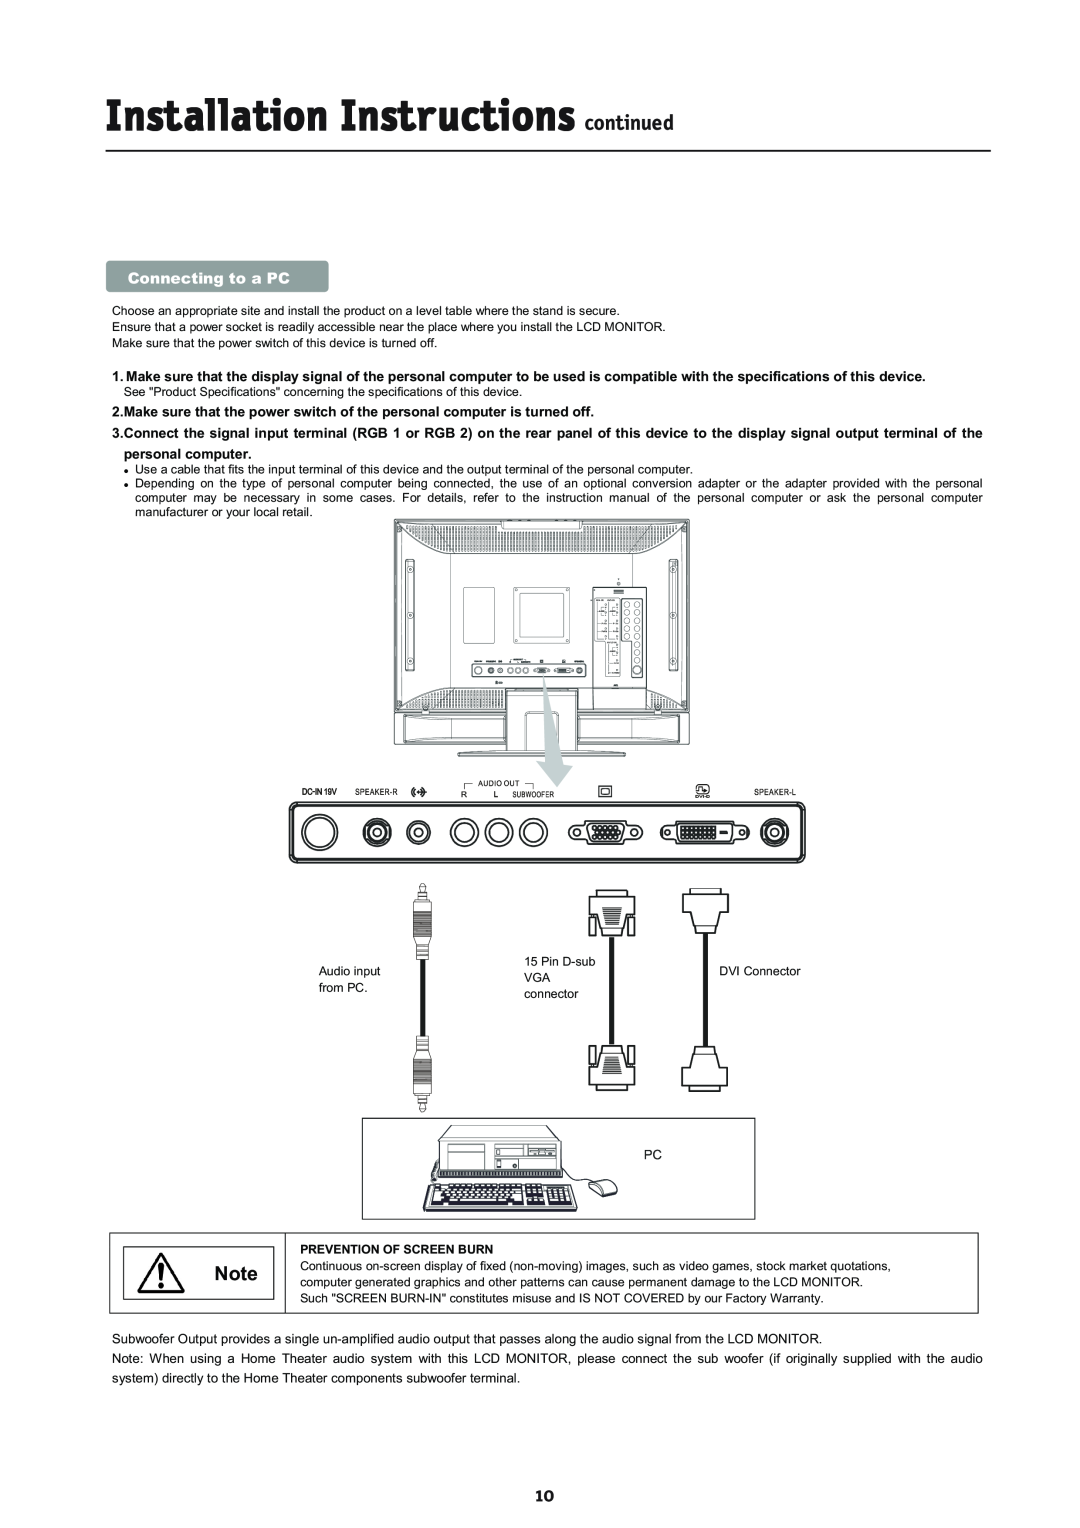 NEC L234GC, LCD2335WXM manual Installation Instructions continued, Connecting to a PC, Prevention Of Screen Burn 